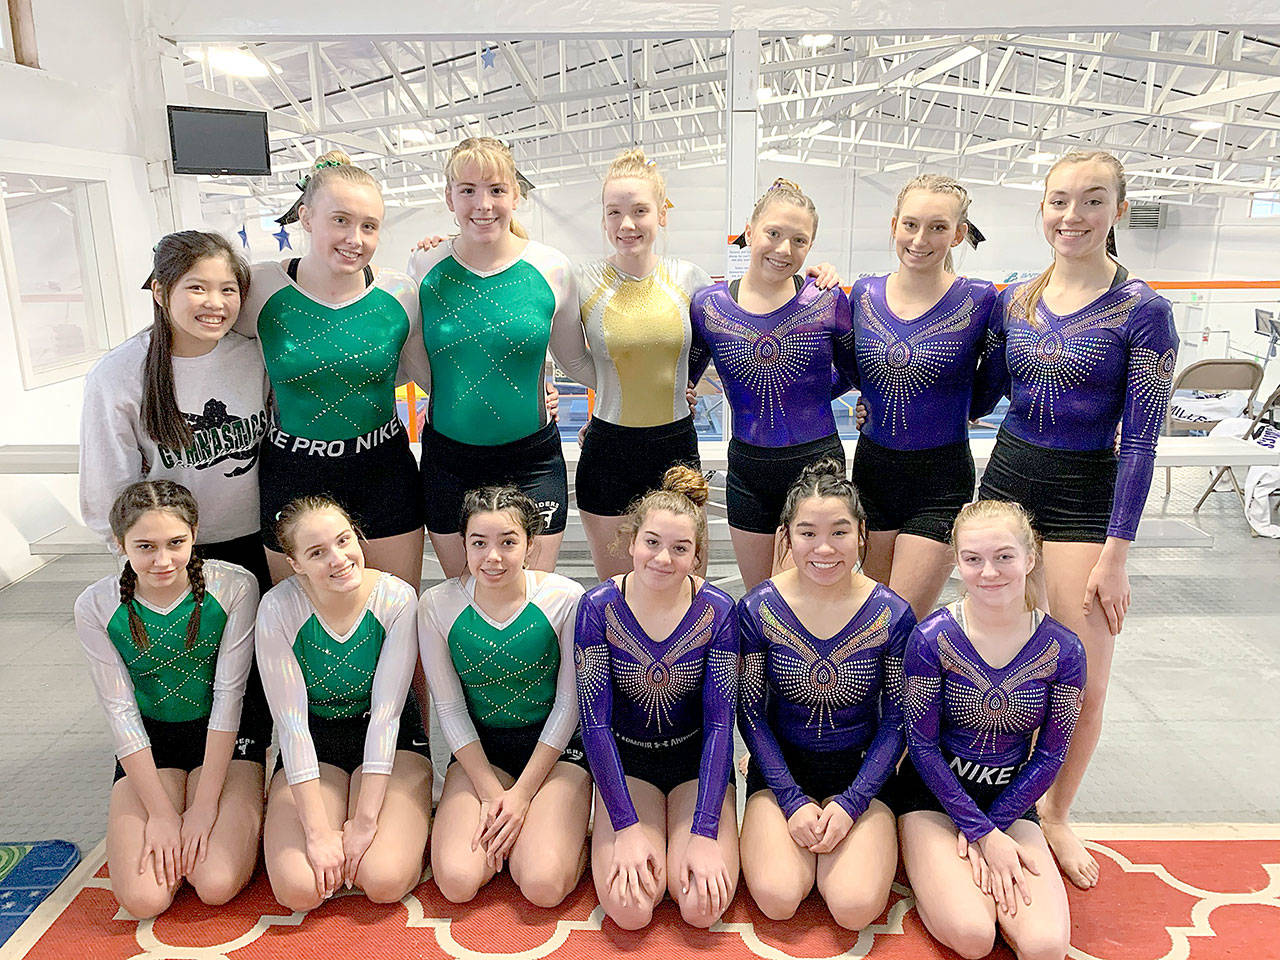 The Port Angeles/Sequim/Crescent combined gymnastics team competed this weekend at the Sehome Invitational in Bellingham. From left, back row, are team members Mei Ying Harper-Smith (manager), Maizie Tucker, Aiesha LaTourette, Aubrie Scott (Crescent), Ellie Turner, Emma Sharp and Gracie Sharp. From left, front row, are Samantha Aranda, Molly Scofield, Estrella Wasankari, Lani Vig, Lease Pfeffer and Kori Miller.